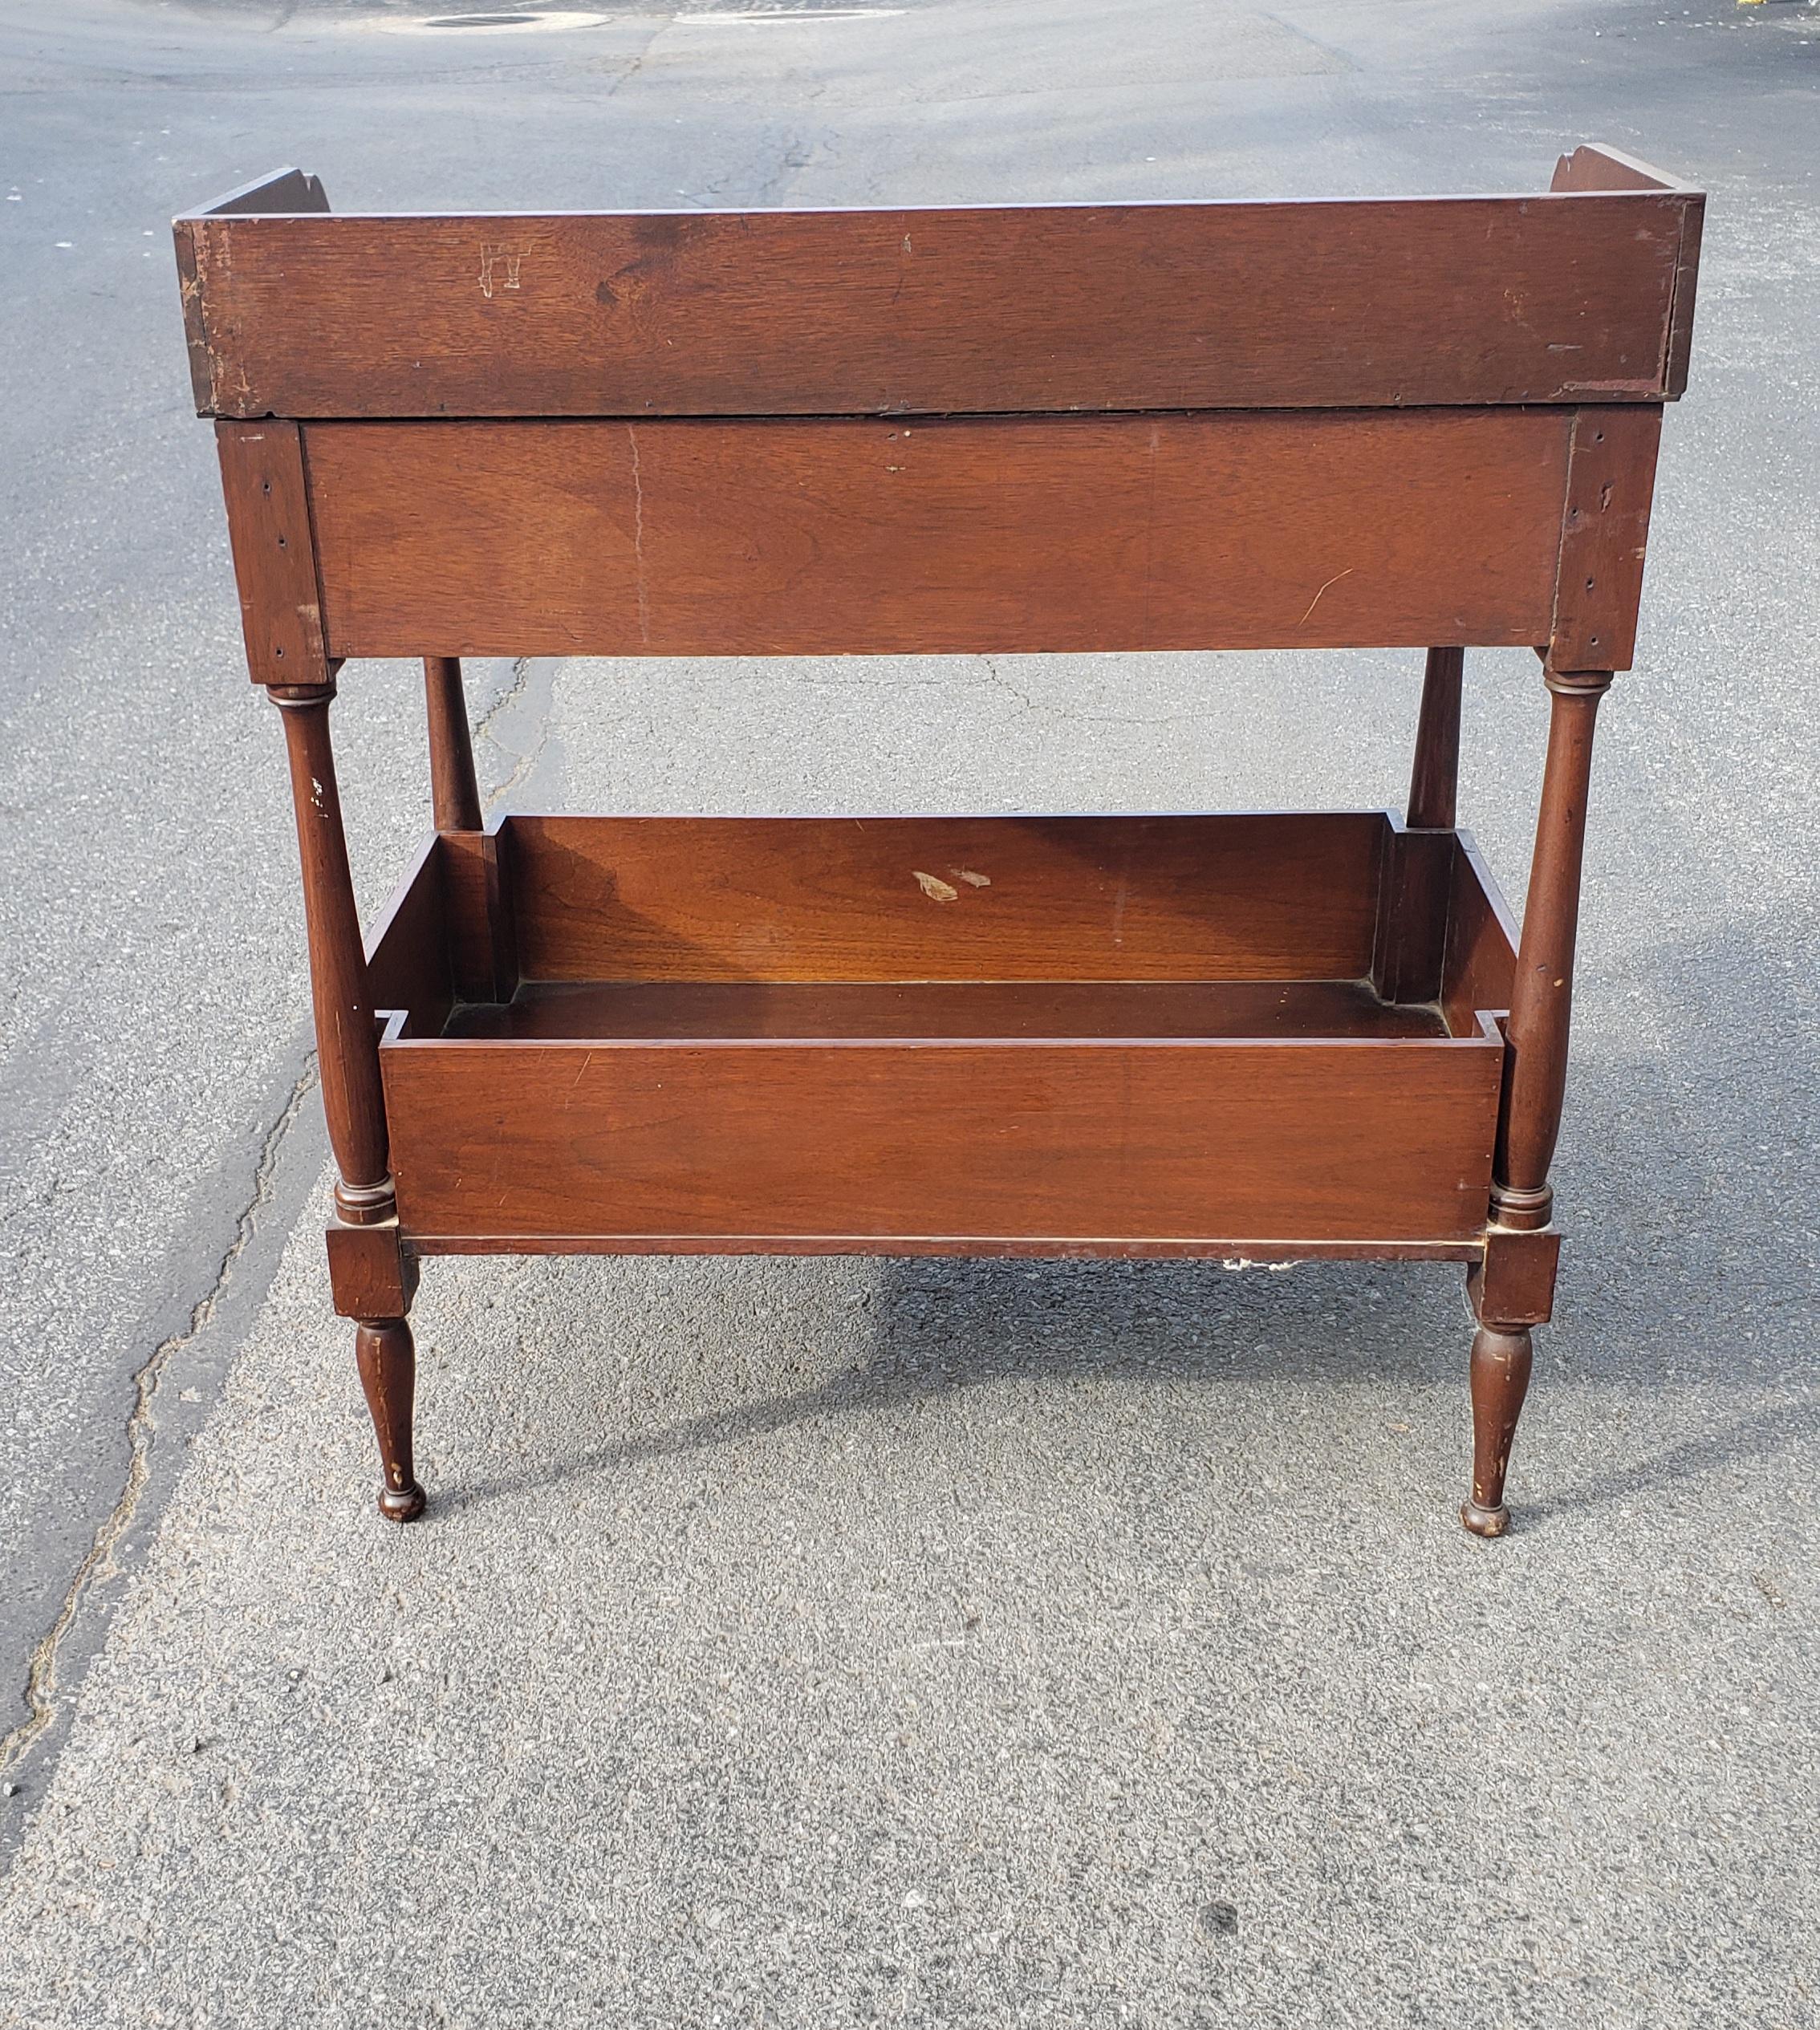 Mahogany 19th Century Walnut Tiered Washstand or Work Table with Drawer and Open Storage For Sale